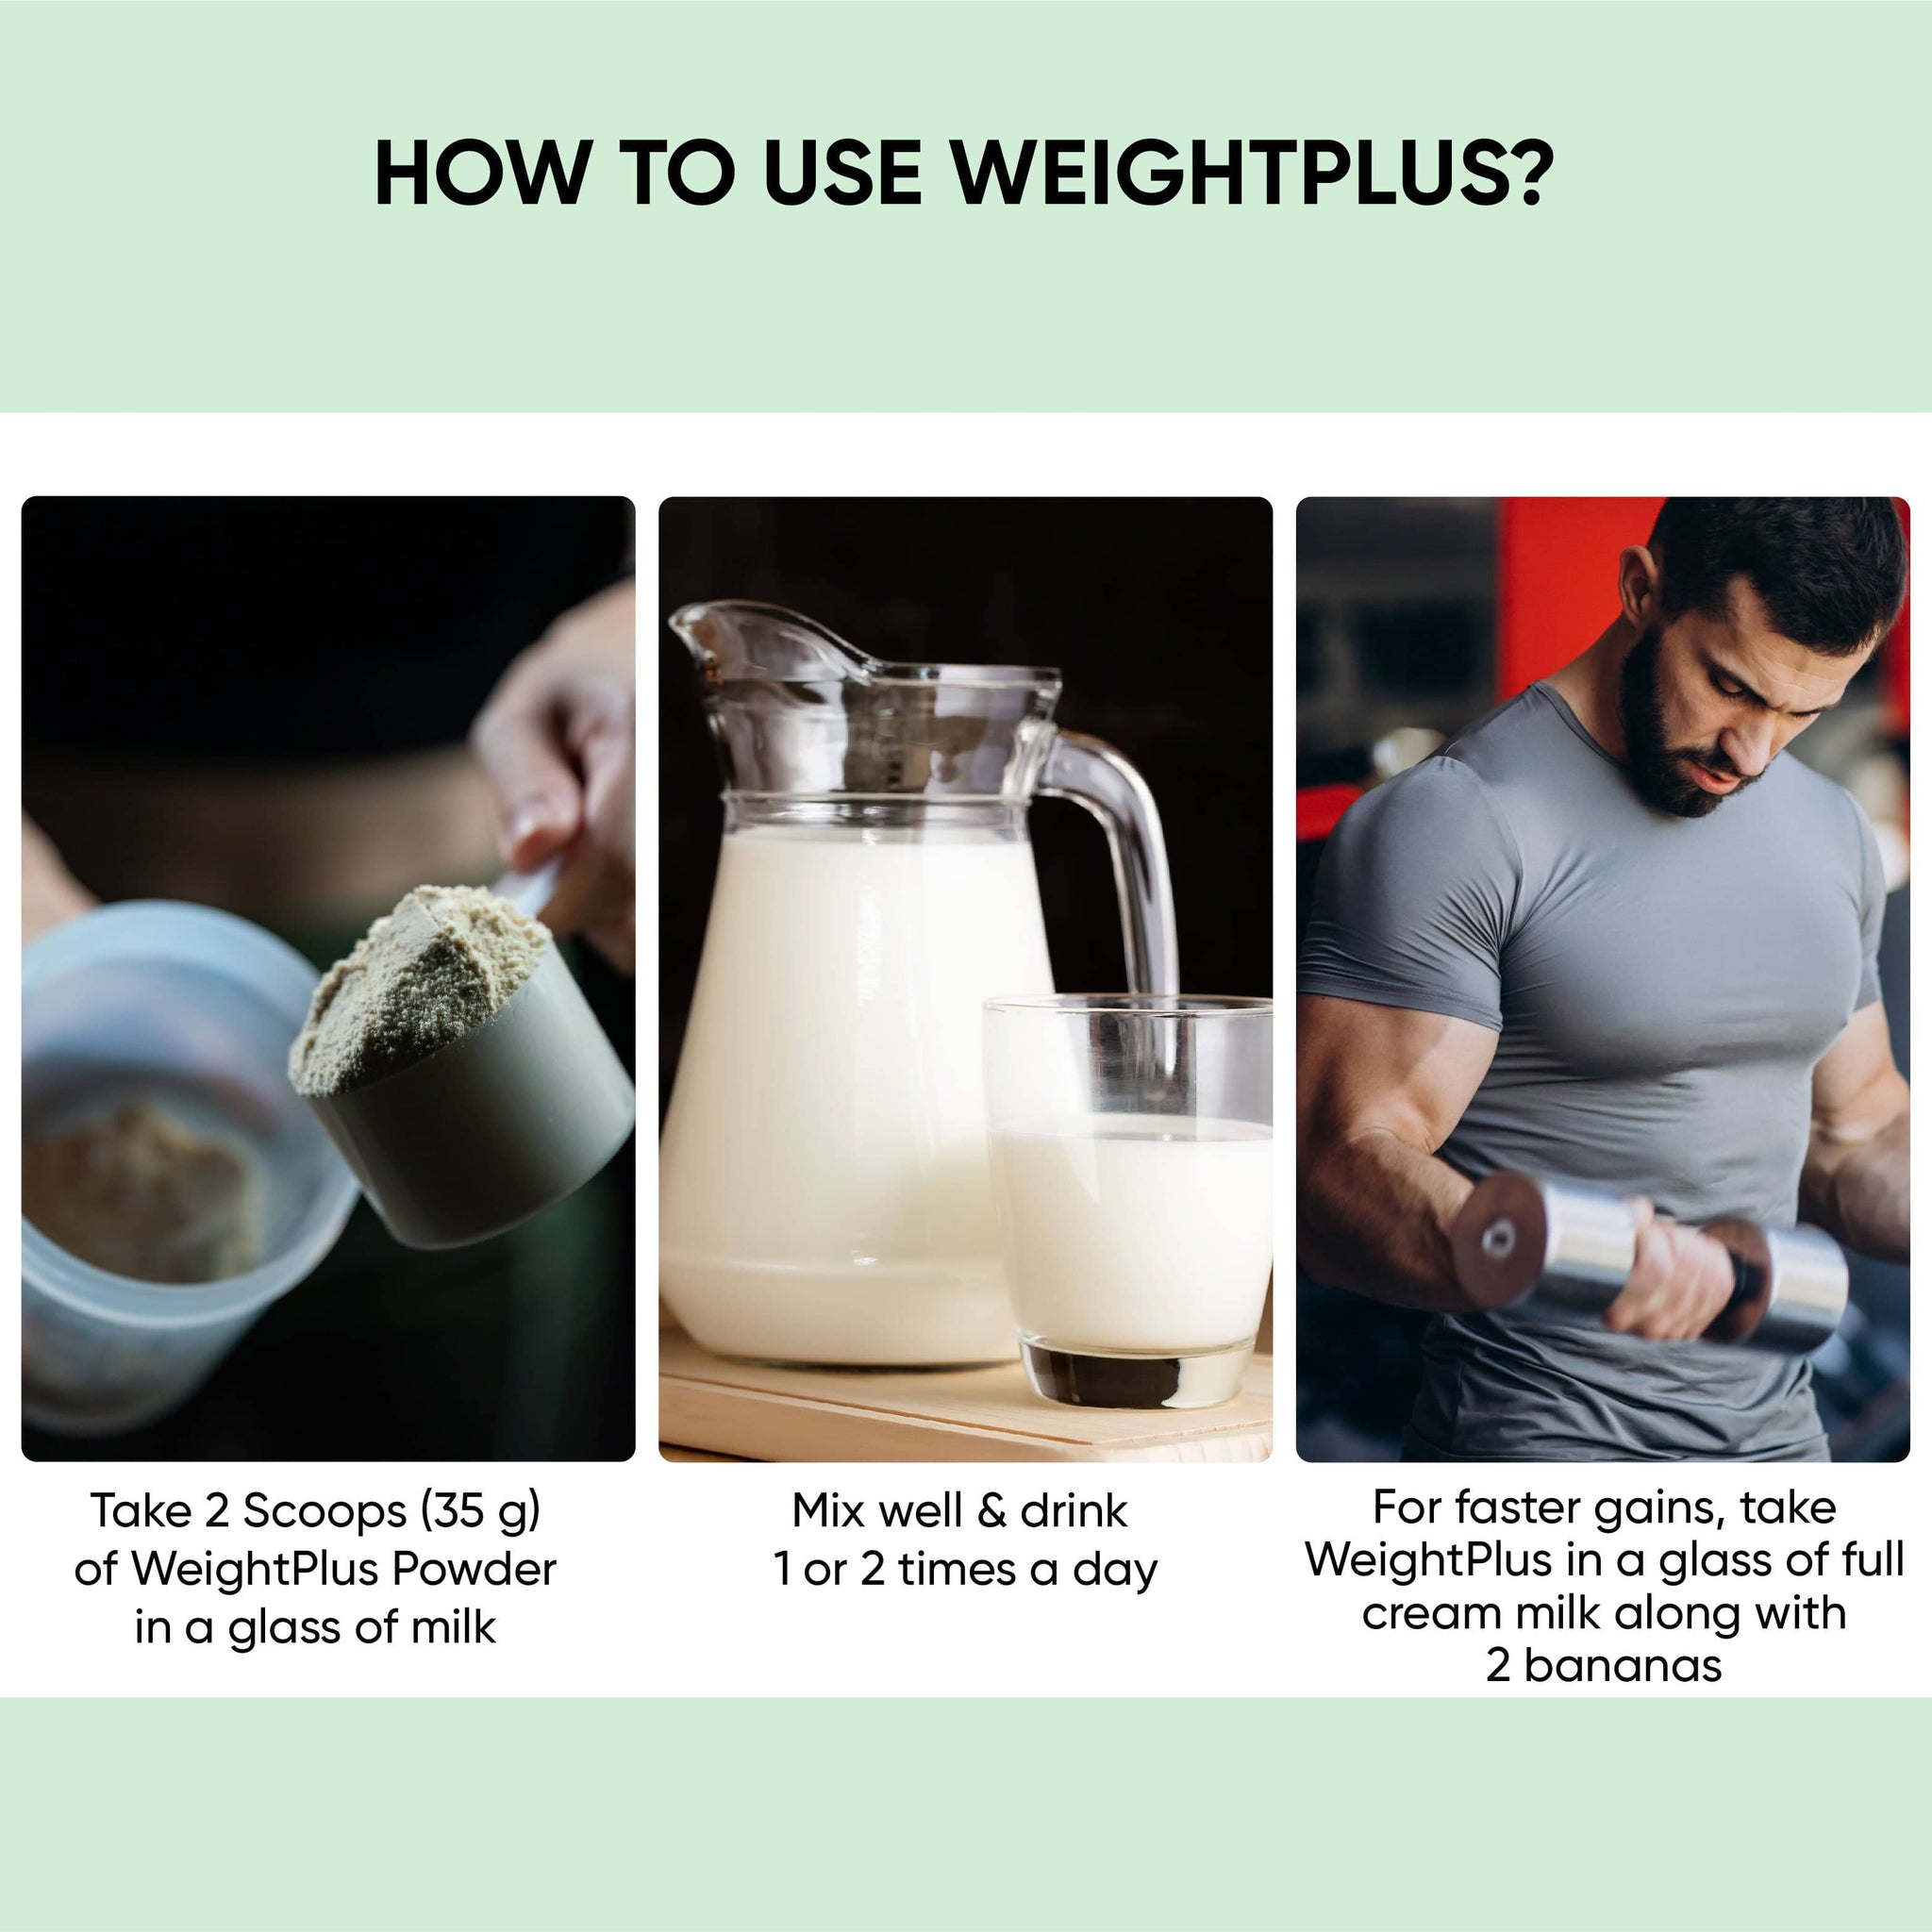 WeightPlus: For Healthy Weight Gain Upto 1.2 Kg/Month